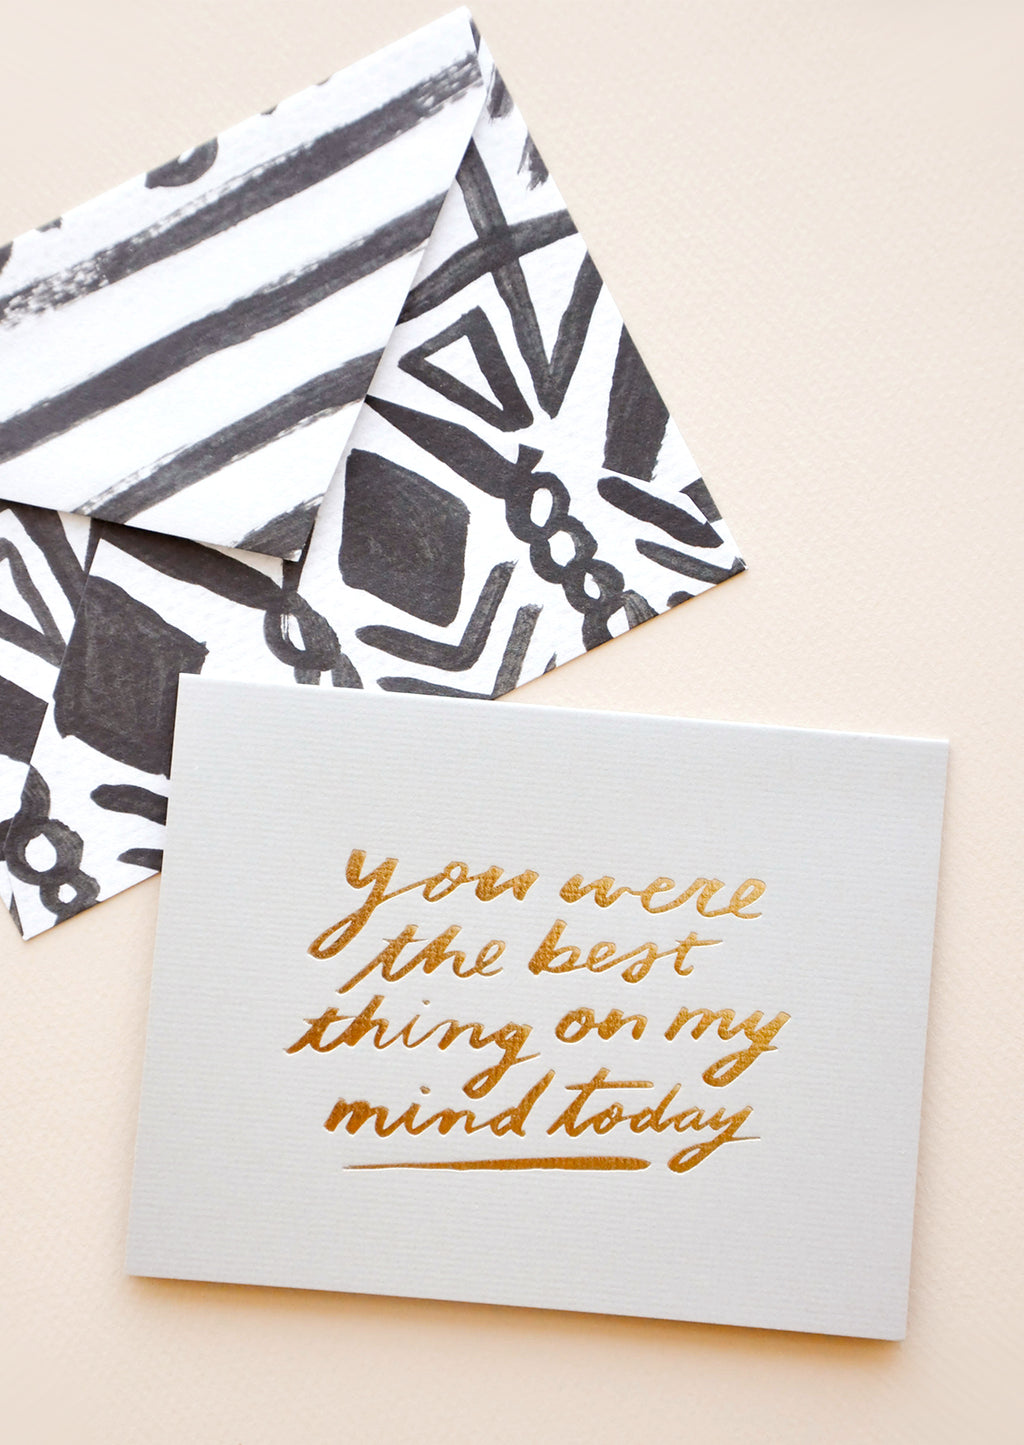 1: Grey greeting card with "You were the best thing on my mind today" in gold foil. Shown with black and white patterned envelope.